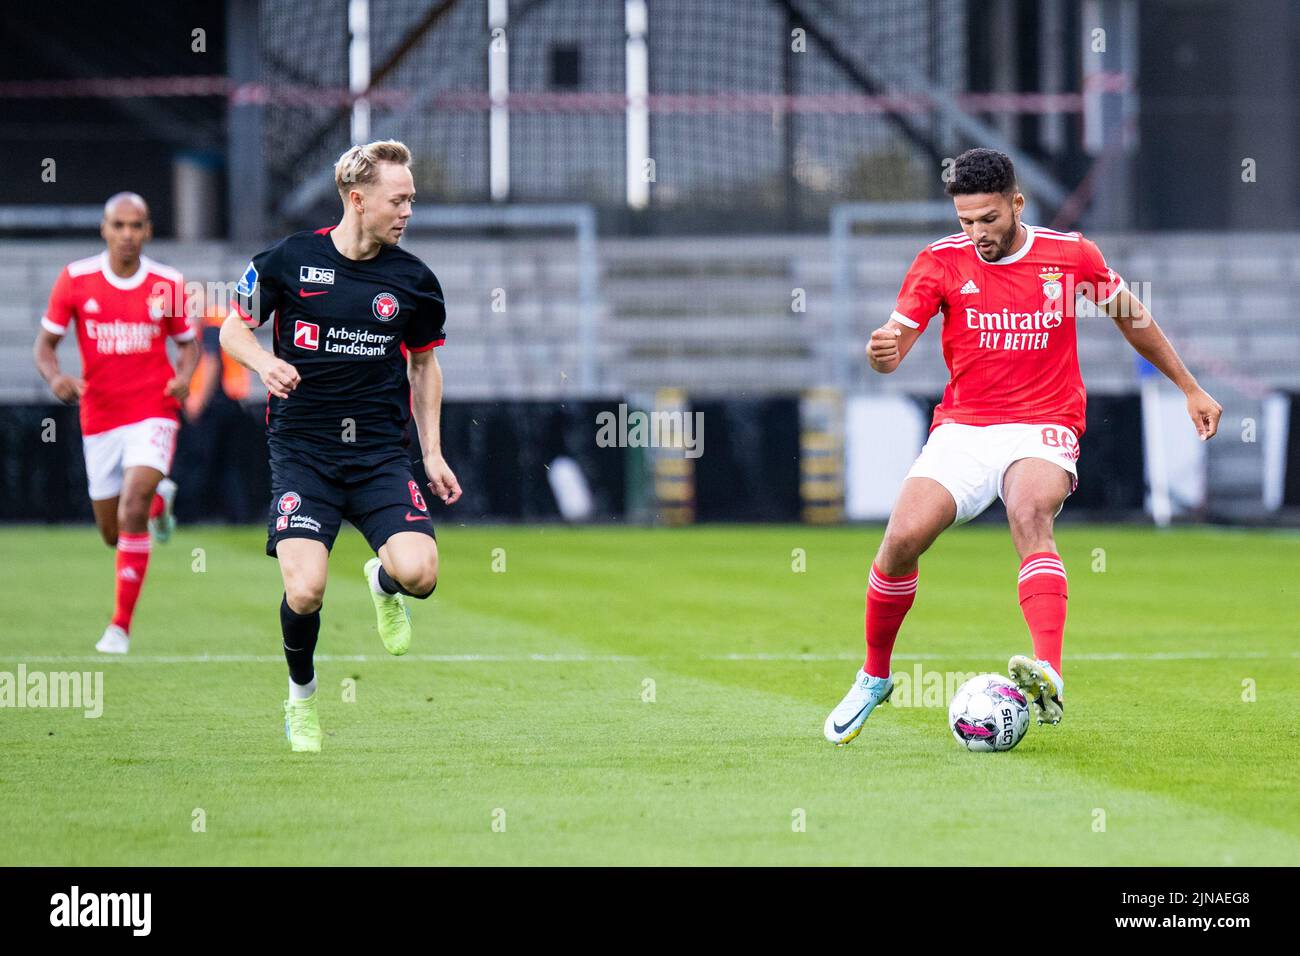 Randers, Denmark. 09th, August 2022. Goncalo Ramos (88) of Benfica and Joel Andersson (6) of FC Midtjylland seen during the UEFA Champions League qualification match between FC Midtjylland and Benfica at Cepheus Park in Randers. (Photo credit: Gonzales Photo - Balazs Popal). Stock Photo